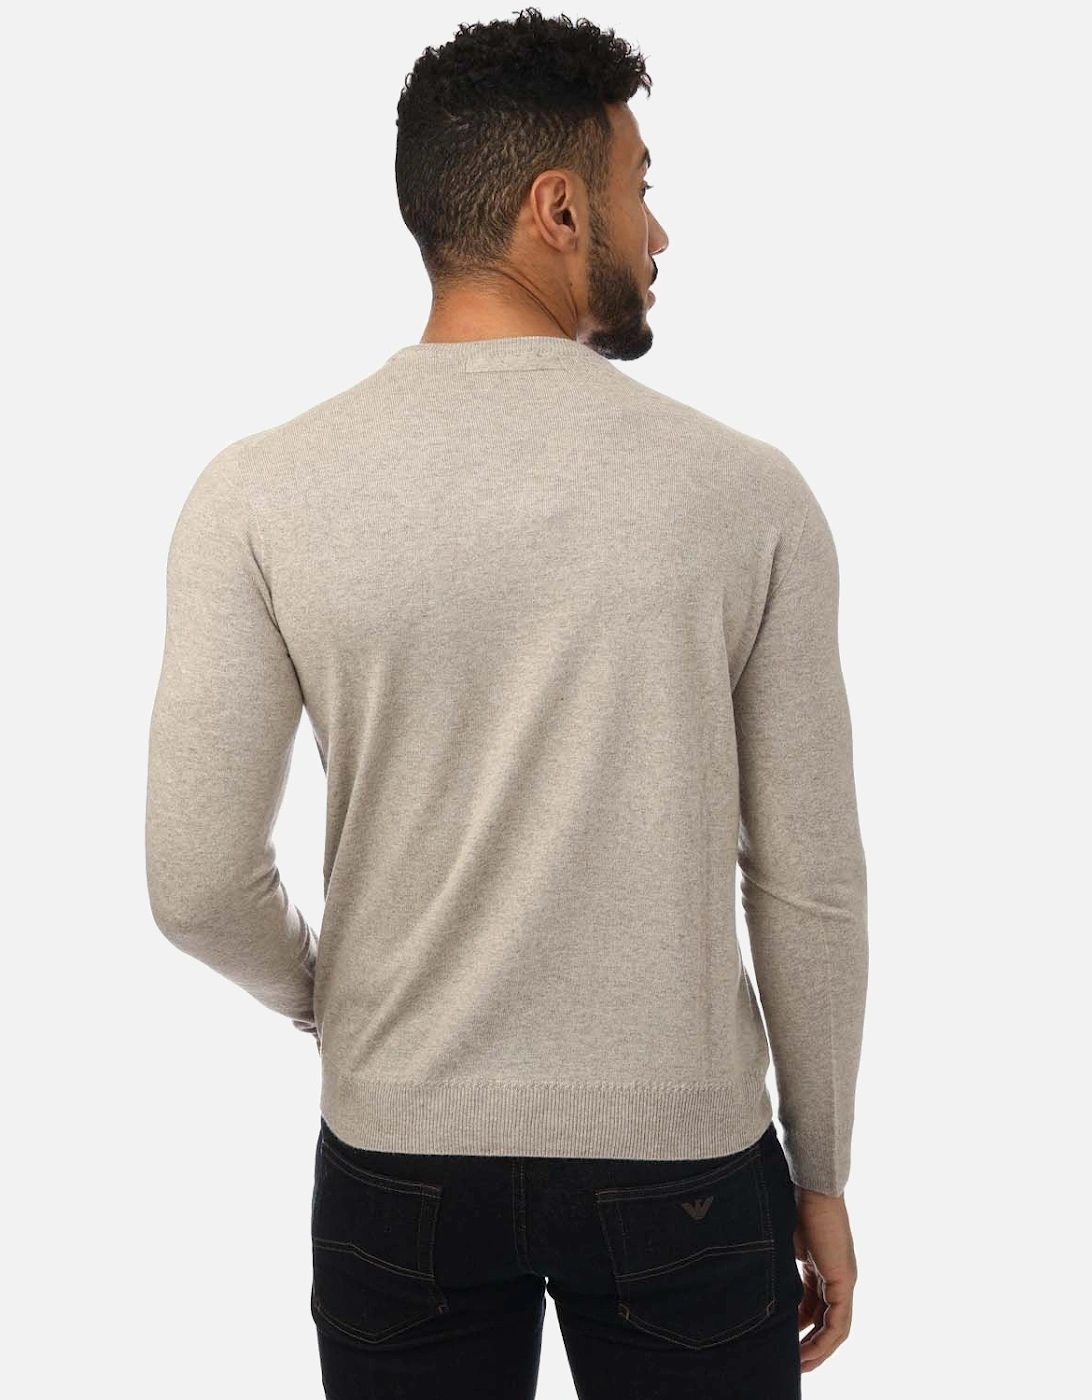 Mens Knitted Jumper